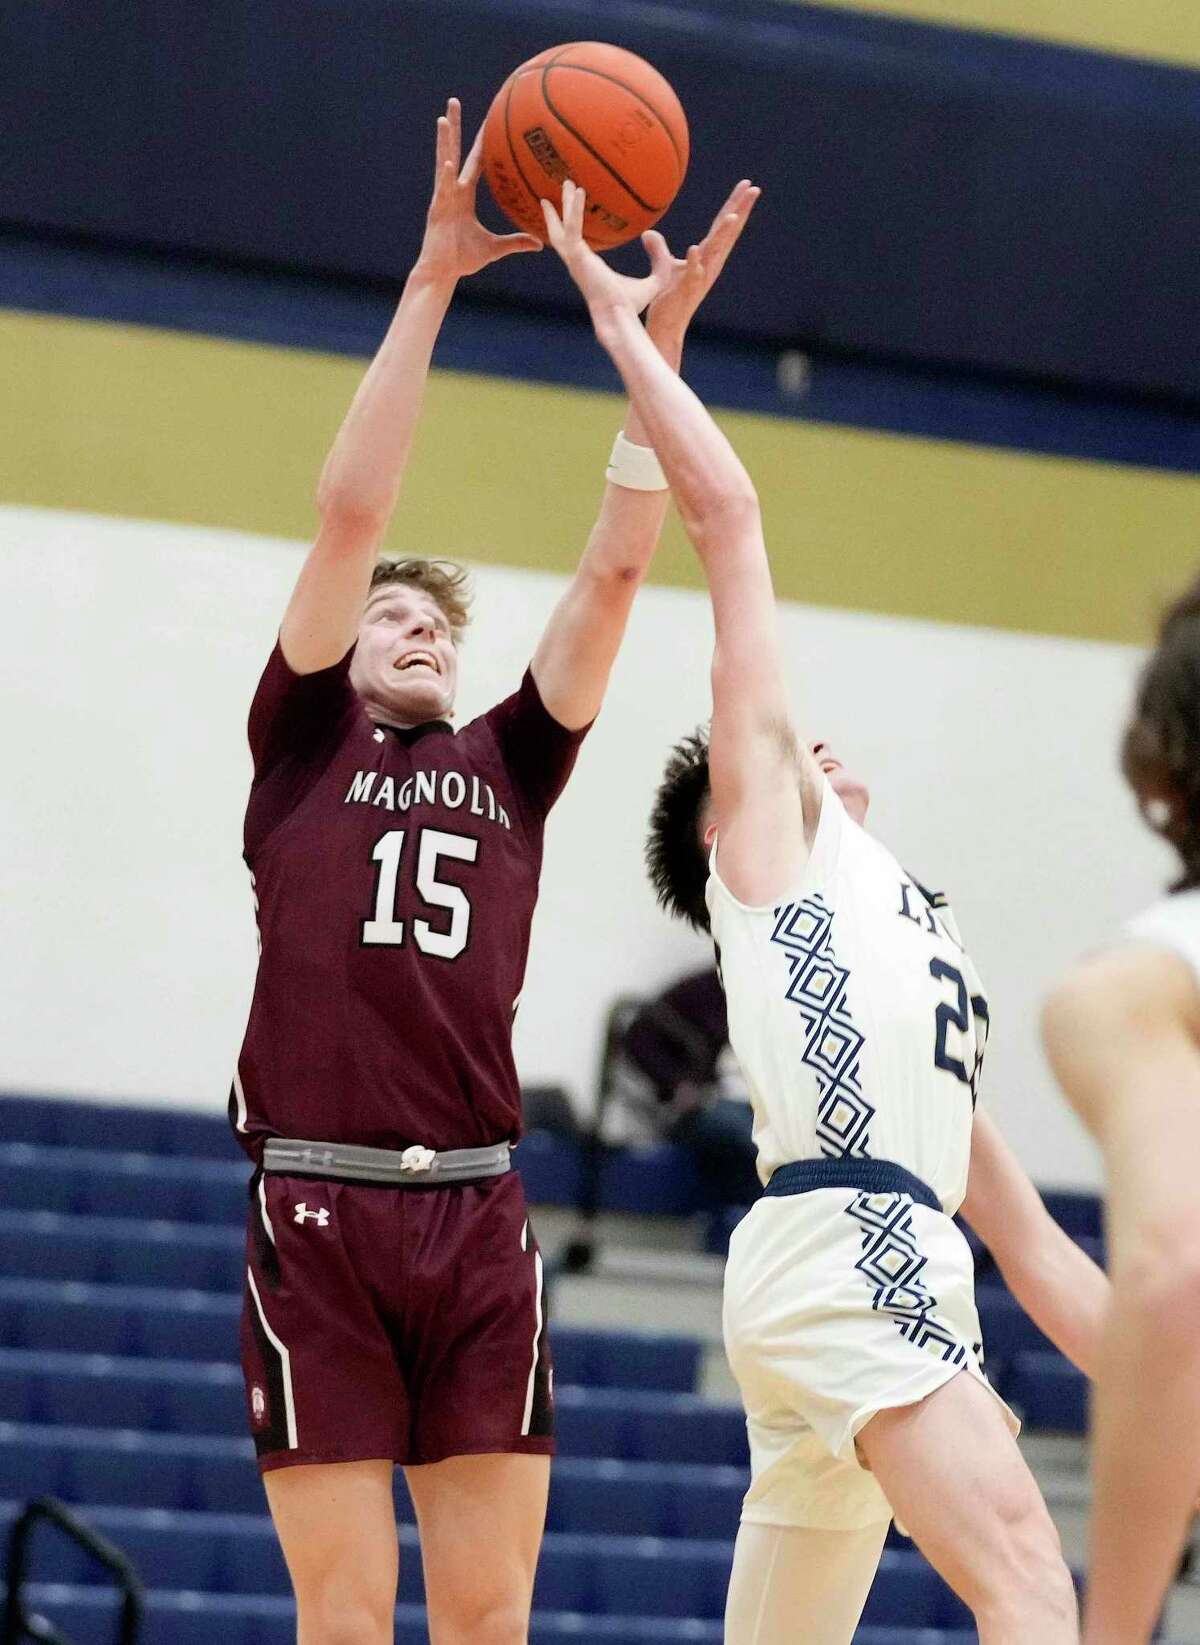 Magnolia guard Tyler Podhalski (15) and Lake Creek guard Braedon Bigott leap for a pass during the second half of a high school basketball game, Friday, Jan. 6, 2023, in Montgomery.